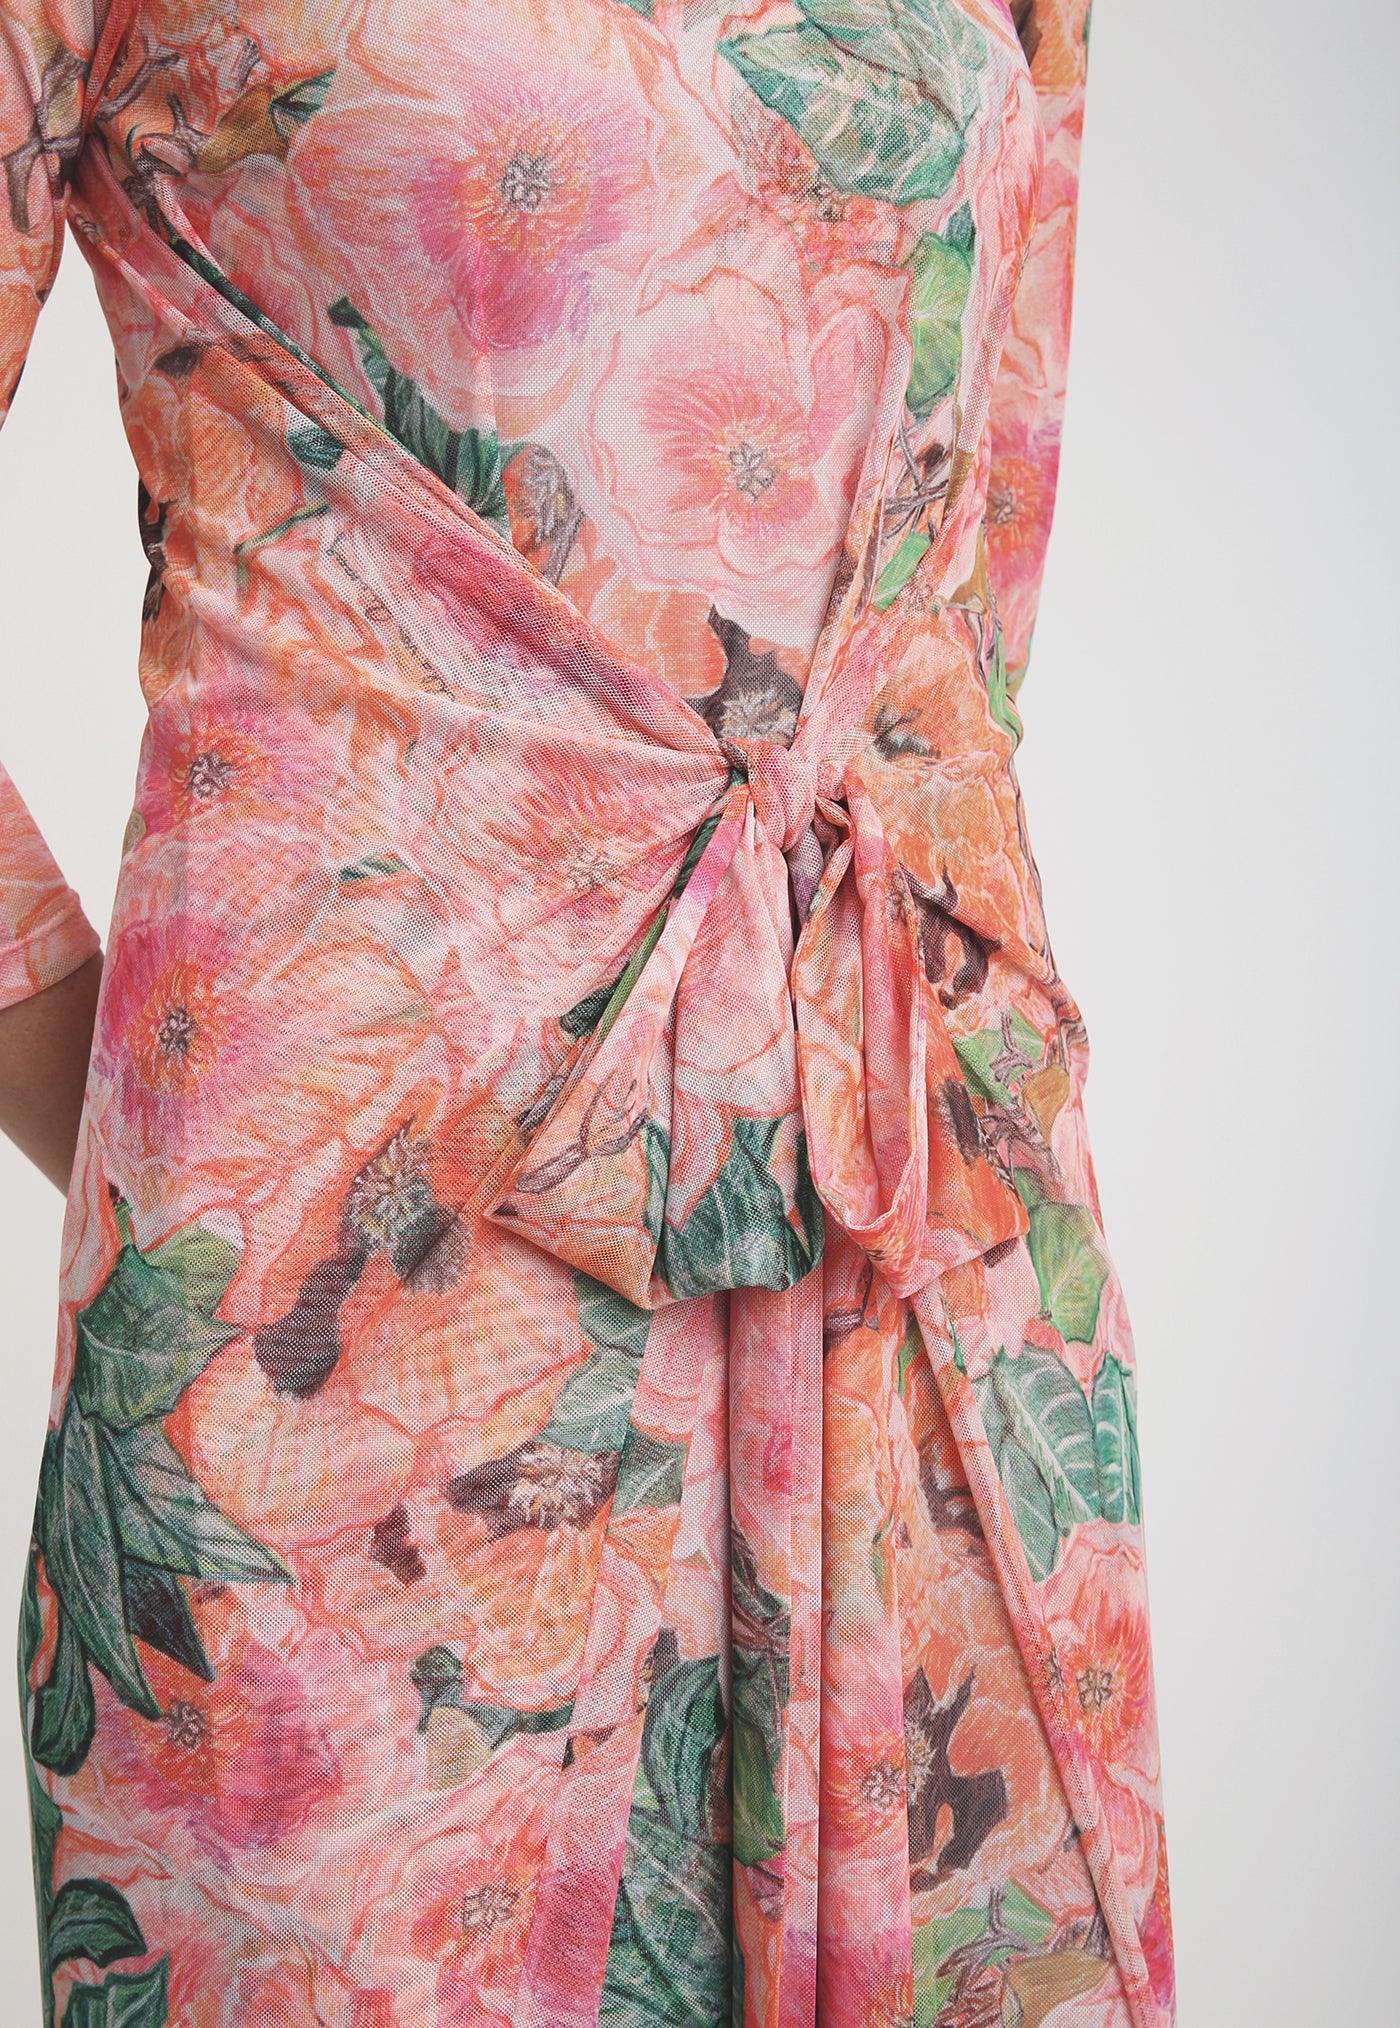 pink and orange floral printed mesh wrap dress layered over long pink and orange long stretch knit dress